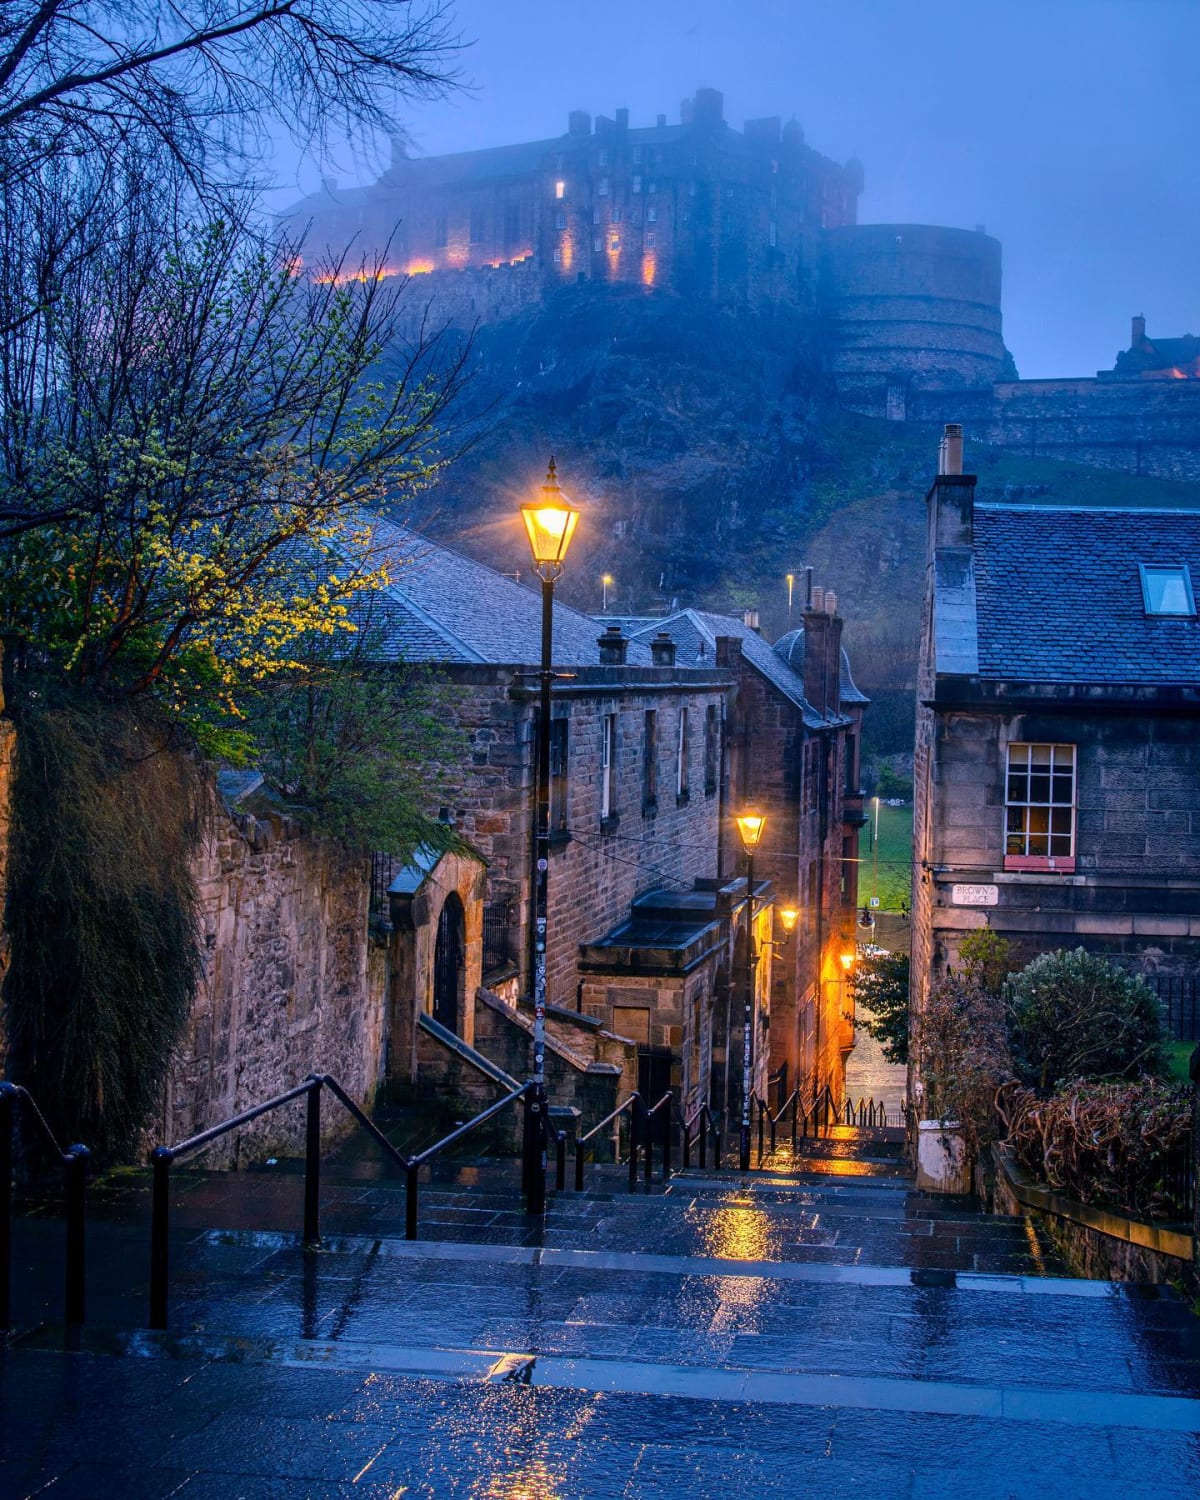 Edinburgh Castle at a distance seen from the rain drenched vennel steps lit with street lamps, Edinburgh, Scotland.